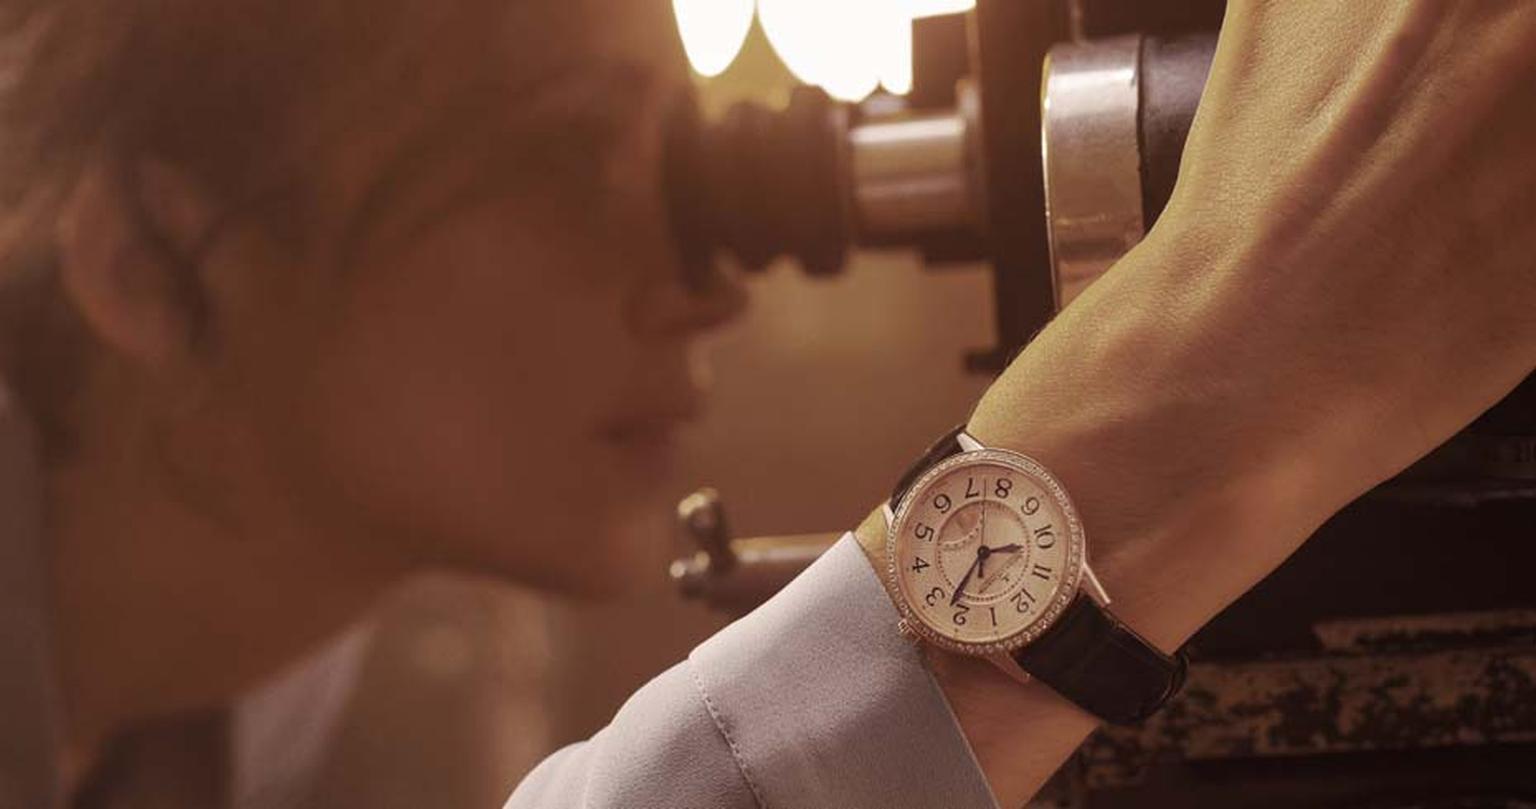 Carmen Chaplin, actress, screenwriter and producer, came to Jaeger-LeCoultre with her grandfather's Memovox line and wears the Rendez-Vous watch in the new advertising campaign.